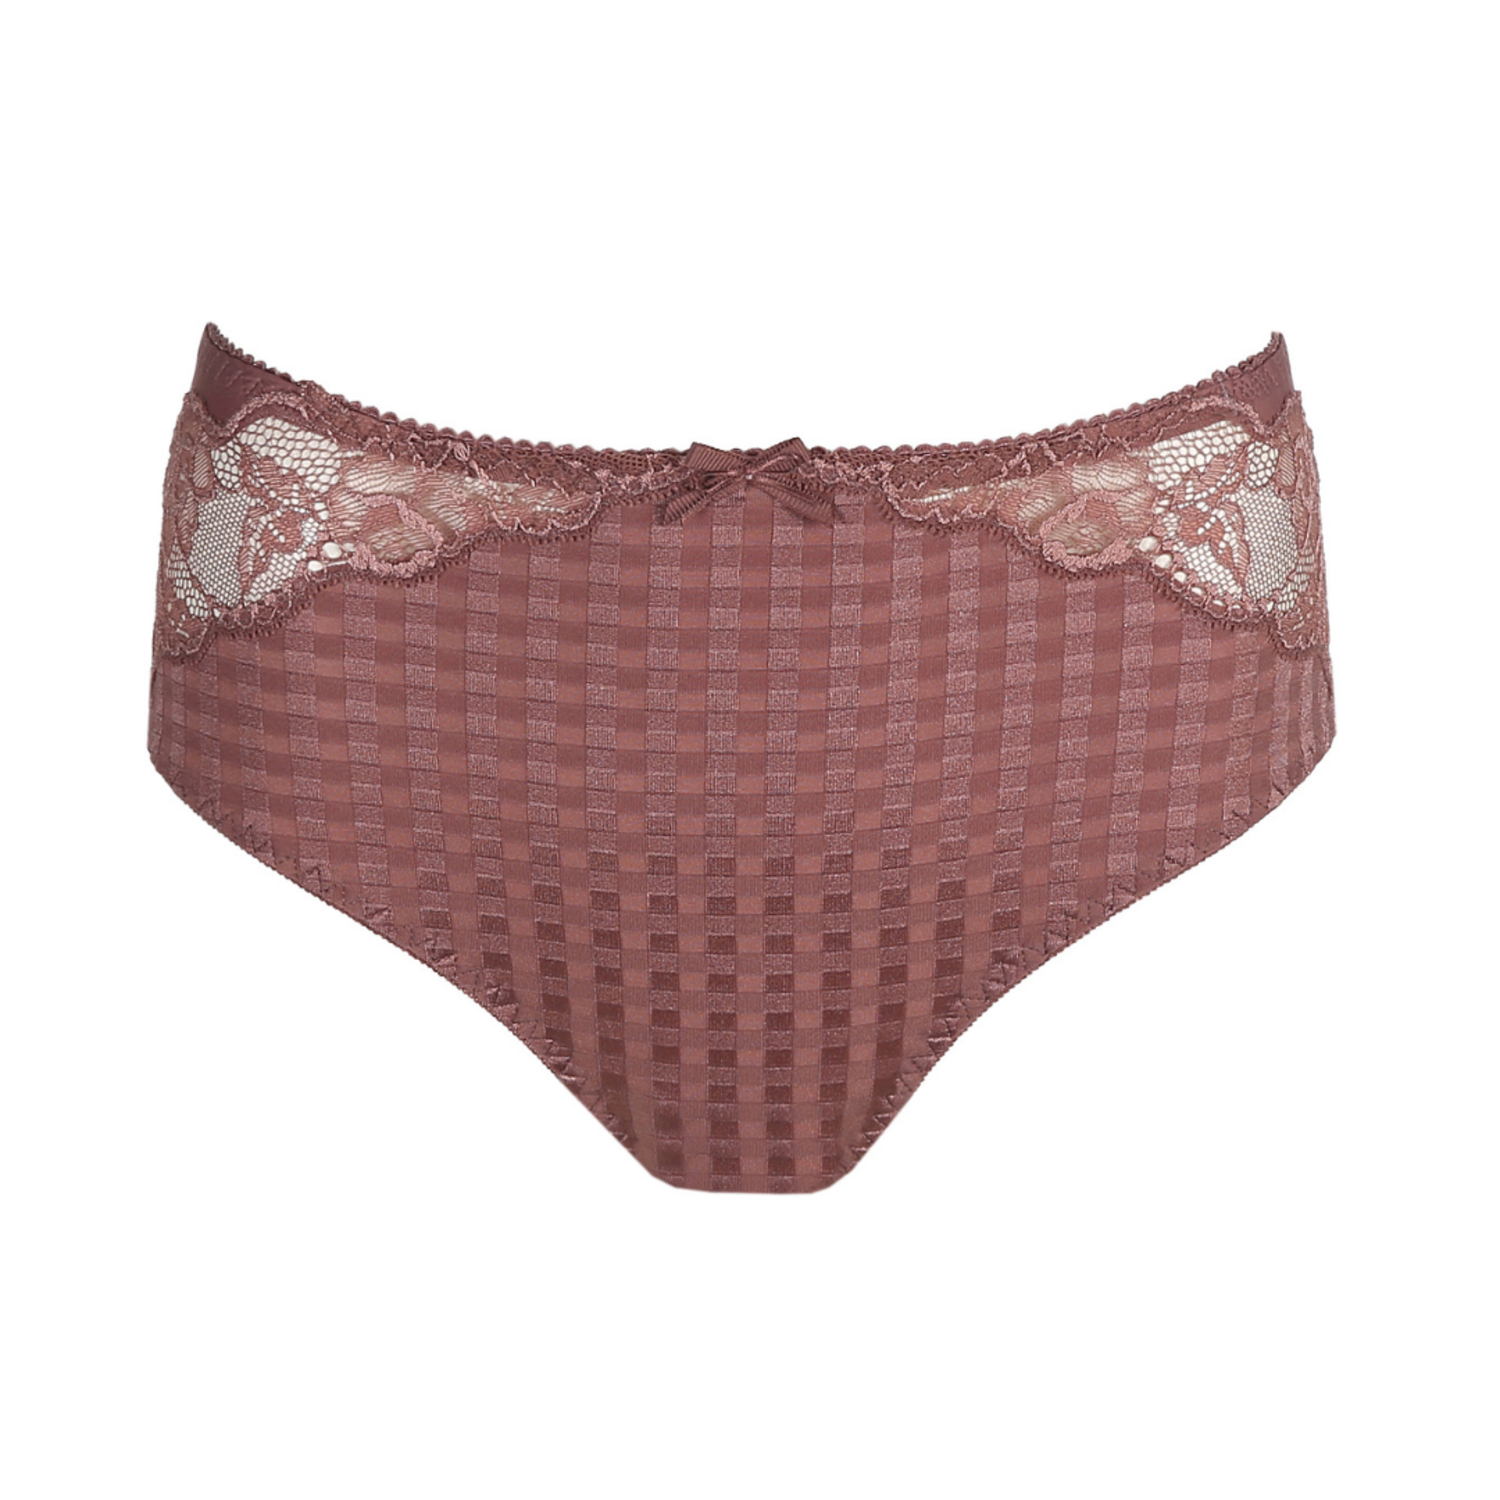 Madison Full Brief Panty Satin Taupe 0562126 - Lace & Day